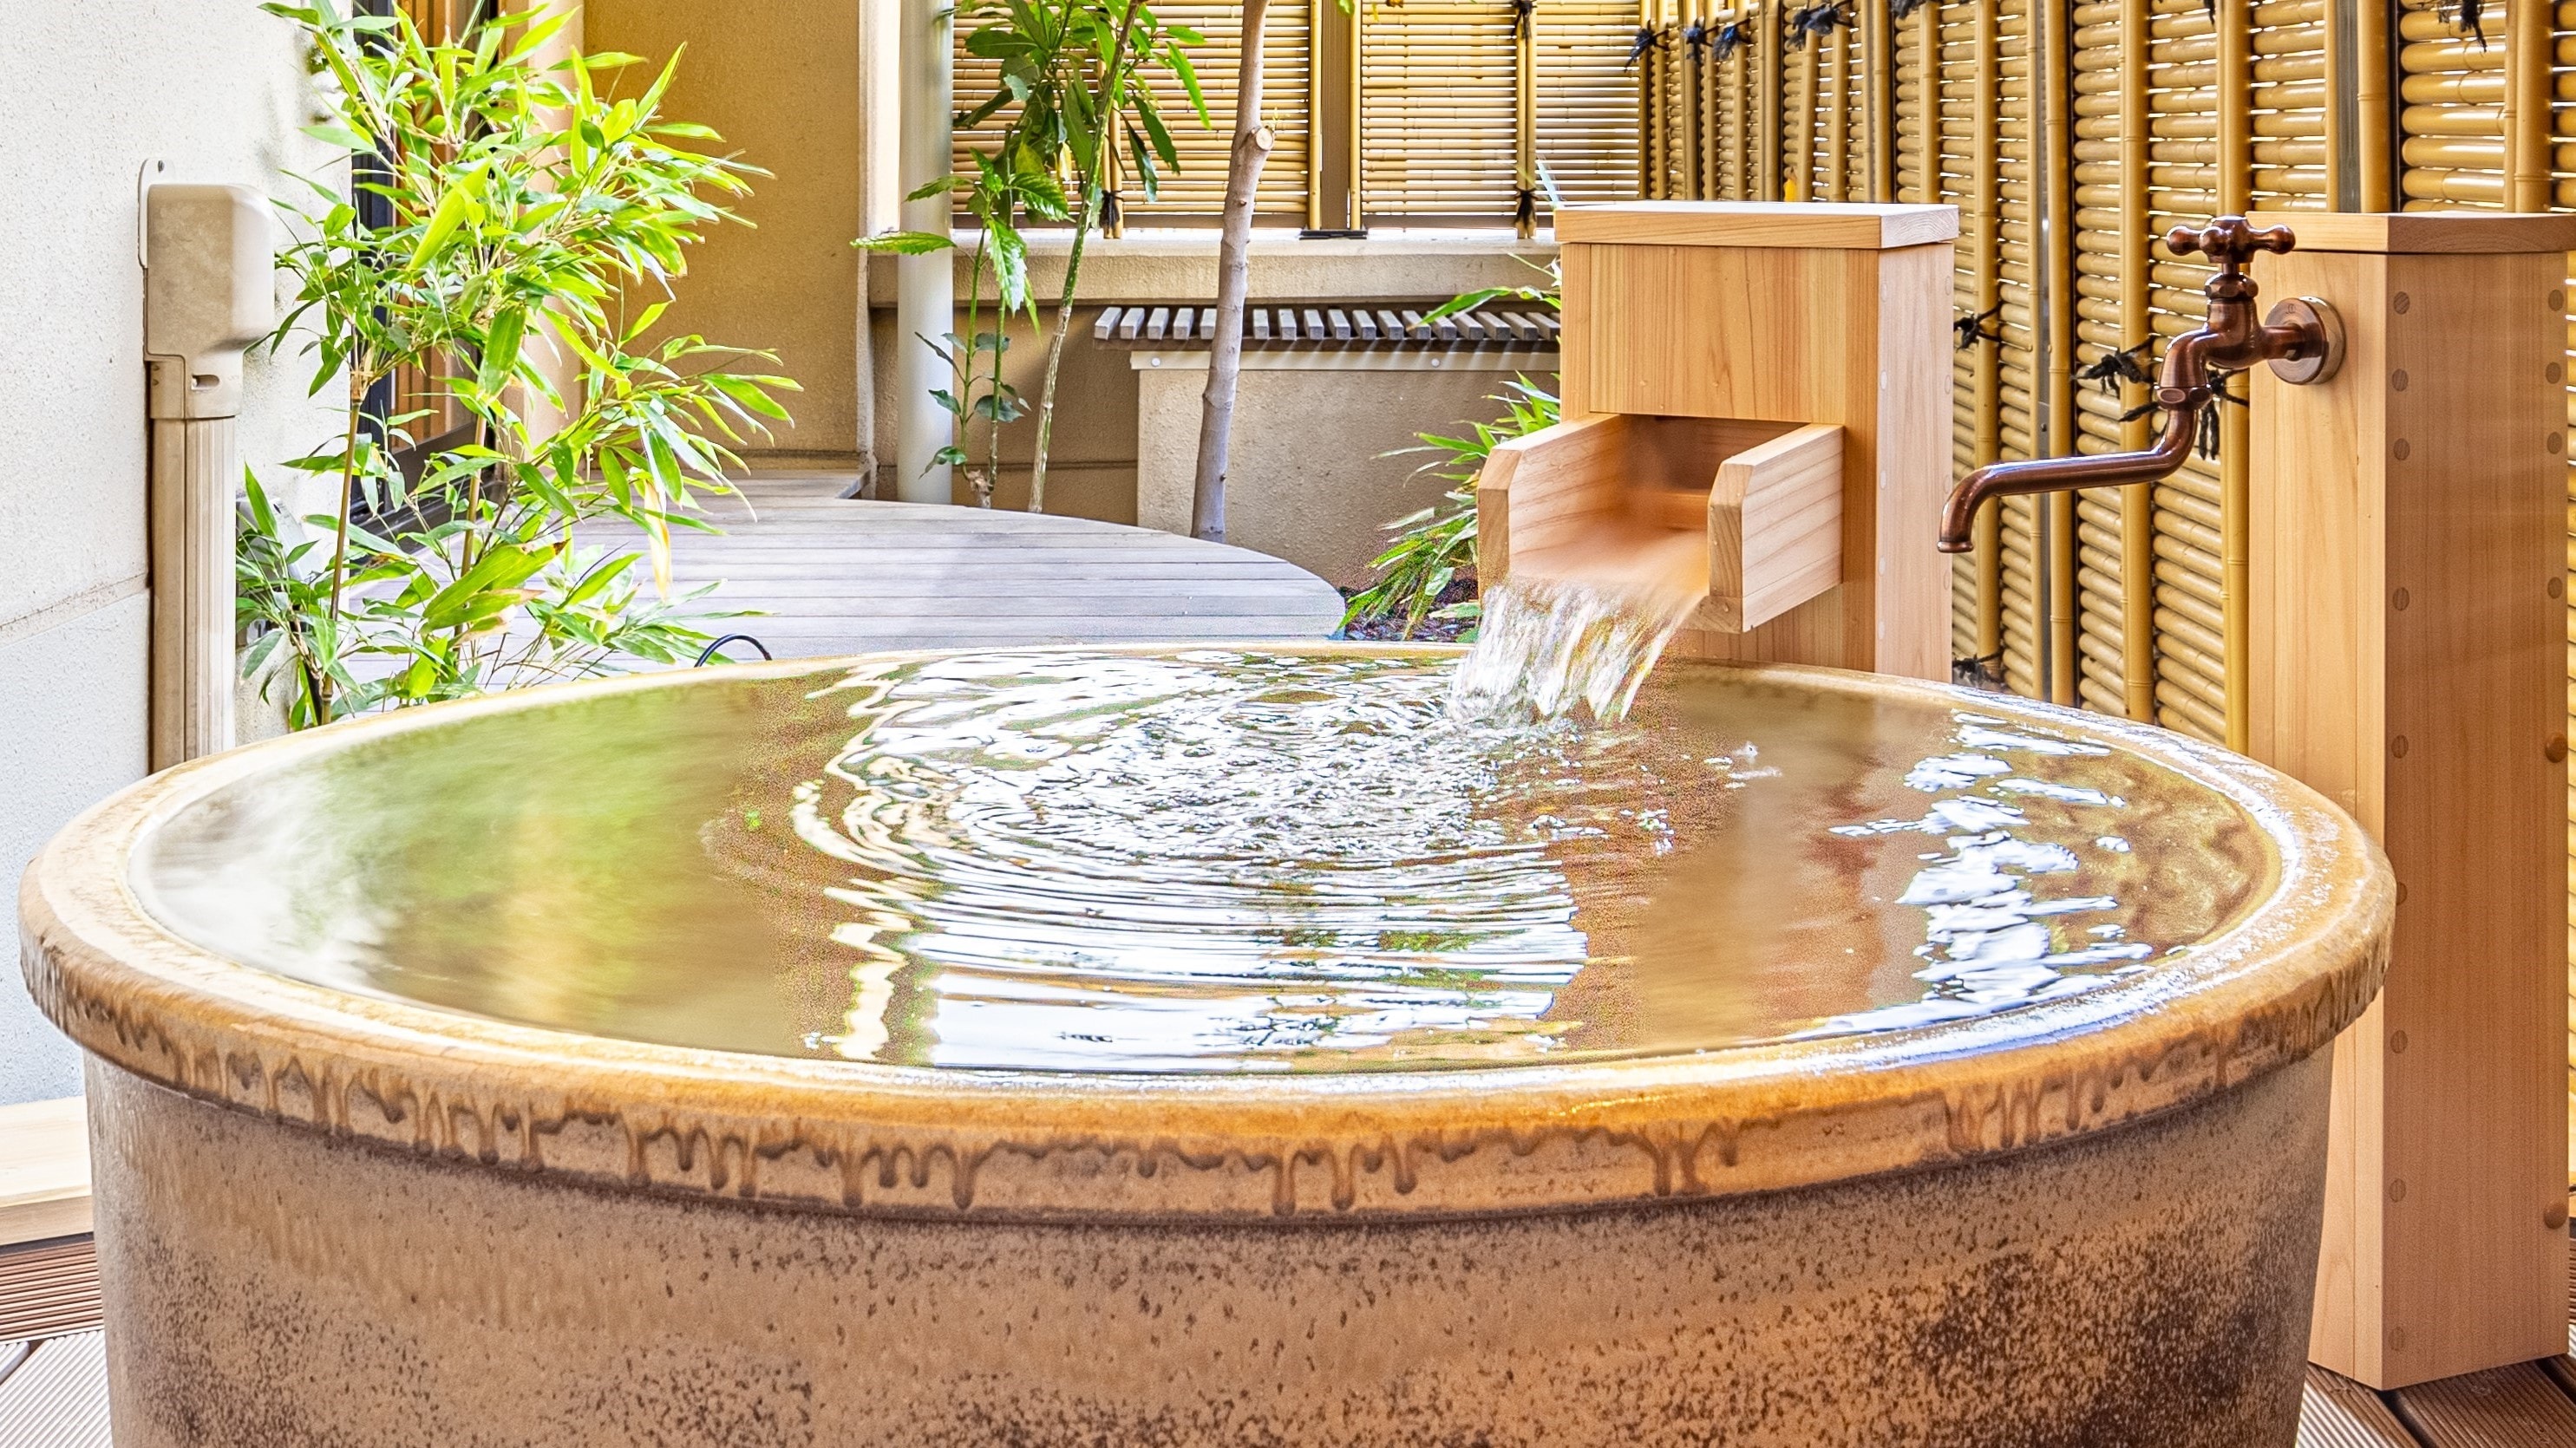 [Japanese-style room with open-air bath] With an open-air bath, you can enjoy the changing seasons at any time without hesitation.